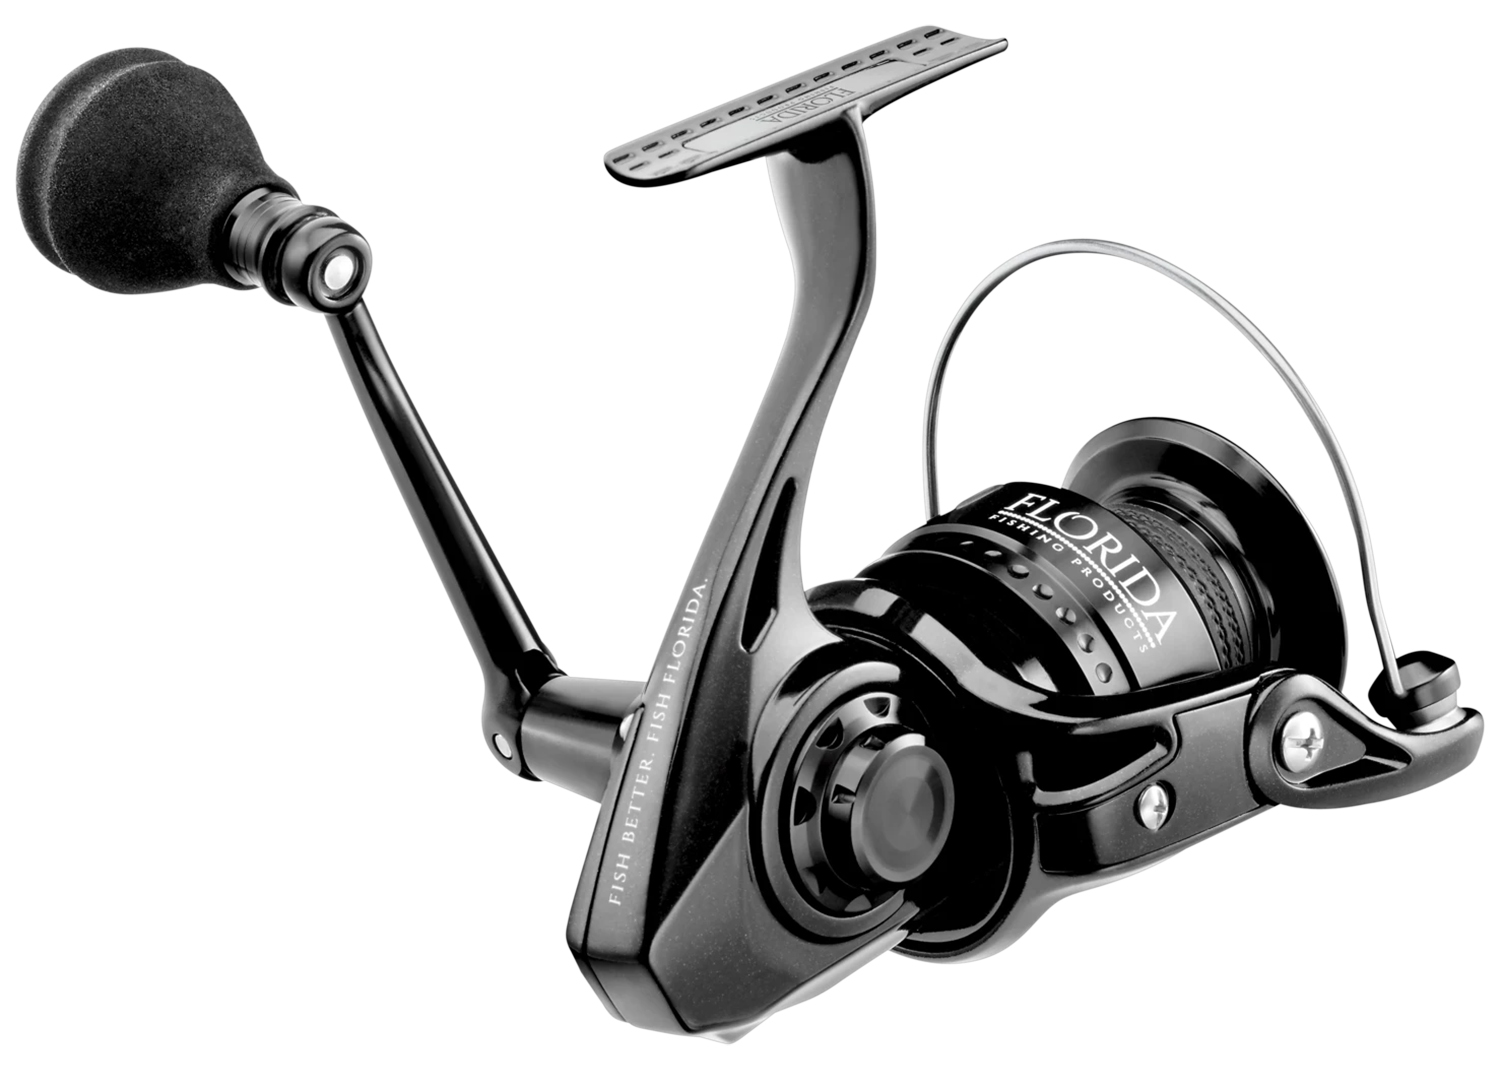 Florida Fishing Products Osprey Saltwater Series 3000 Spinning Reel